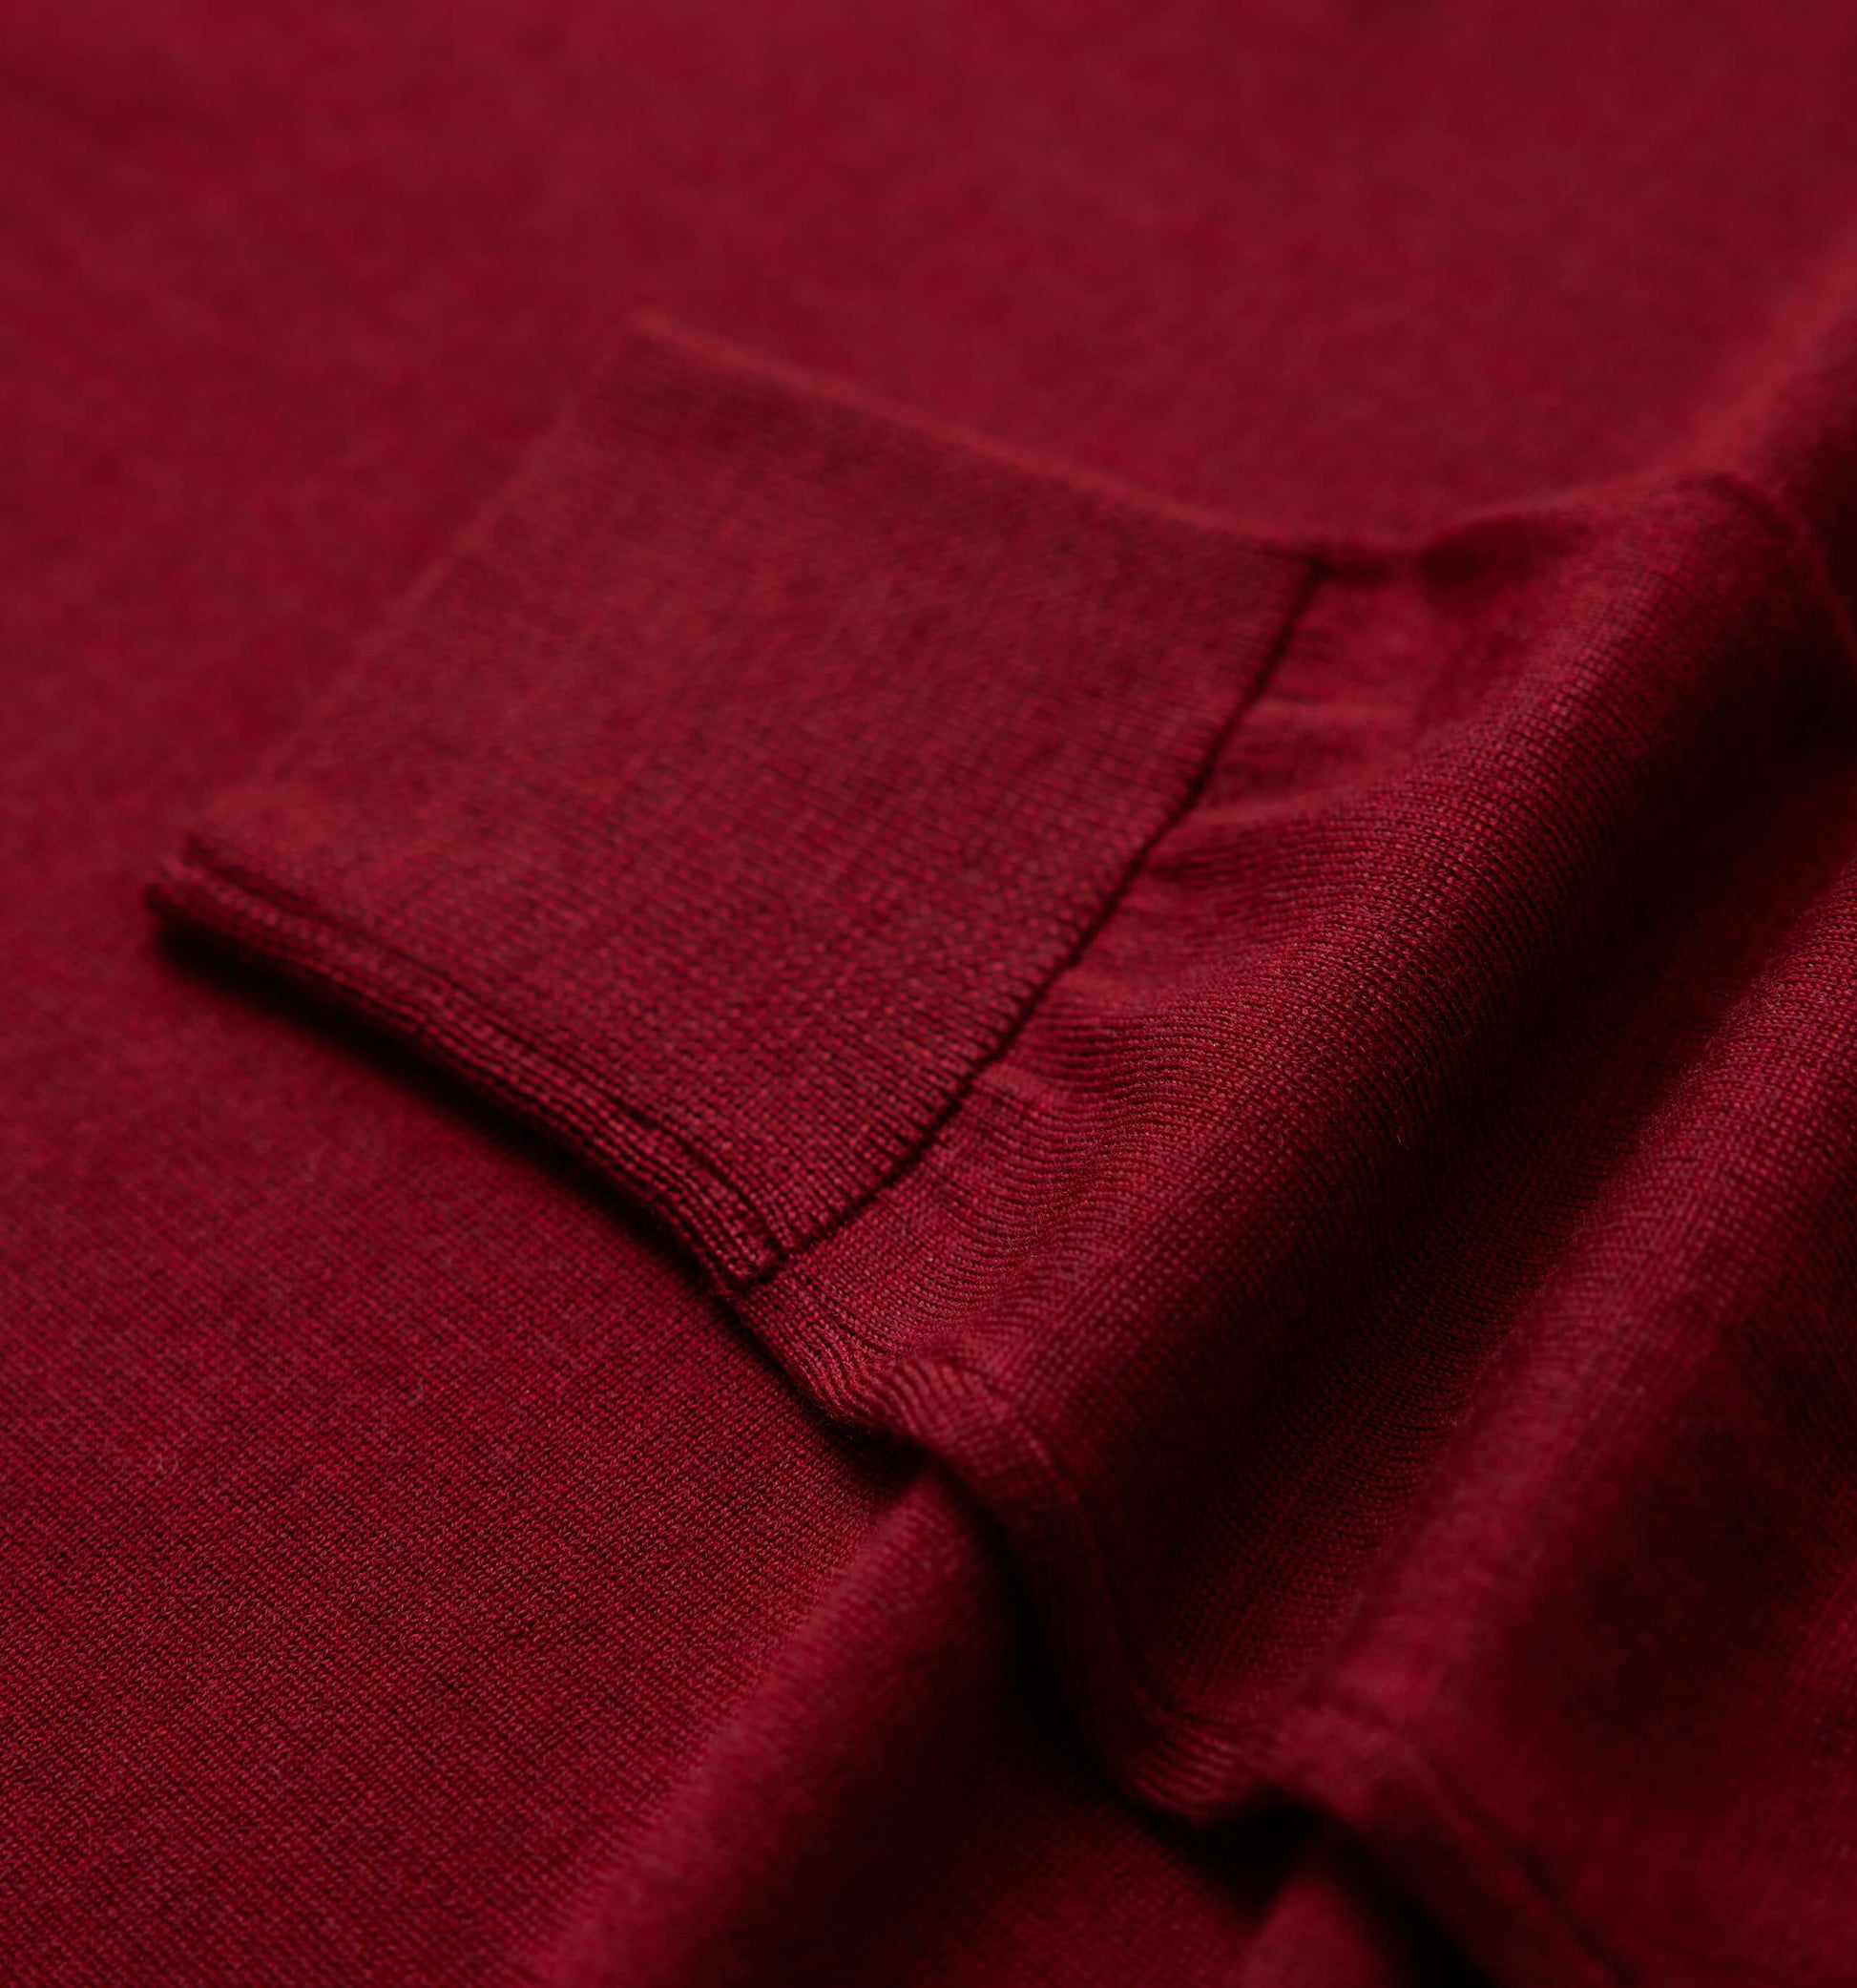 The Michael - Merino Wool Zip Mock In Red From King Essentials